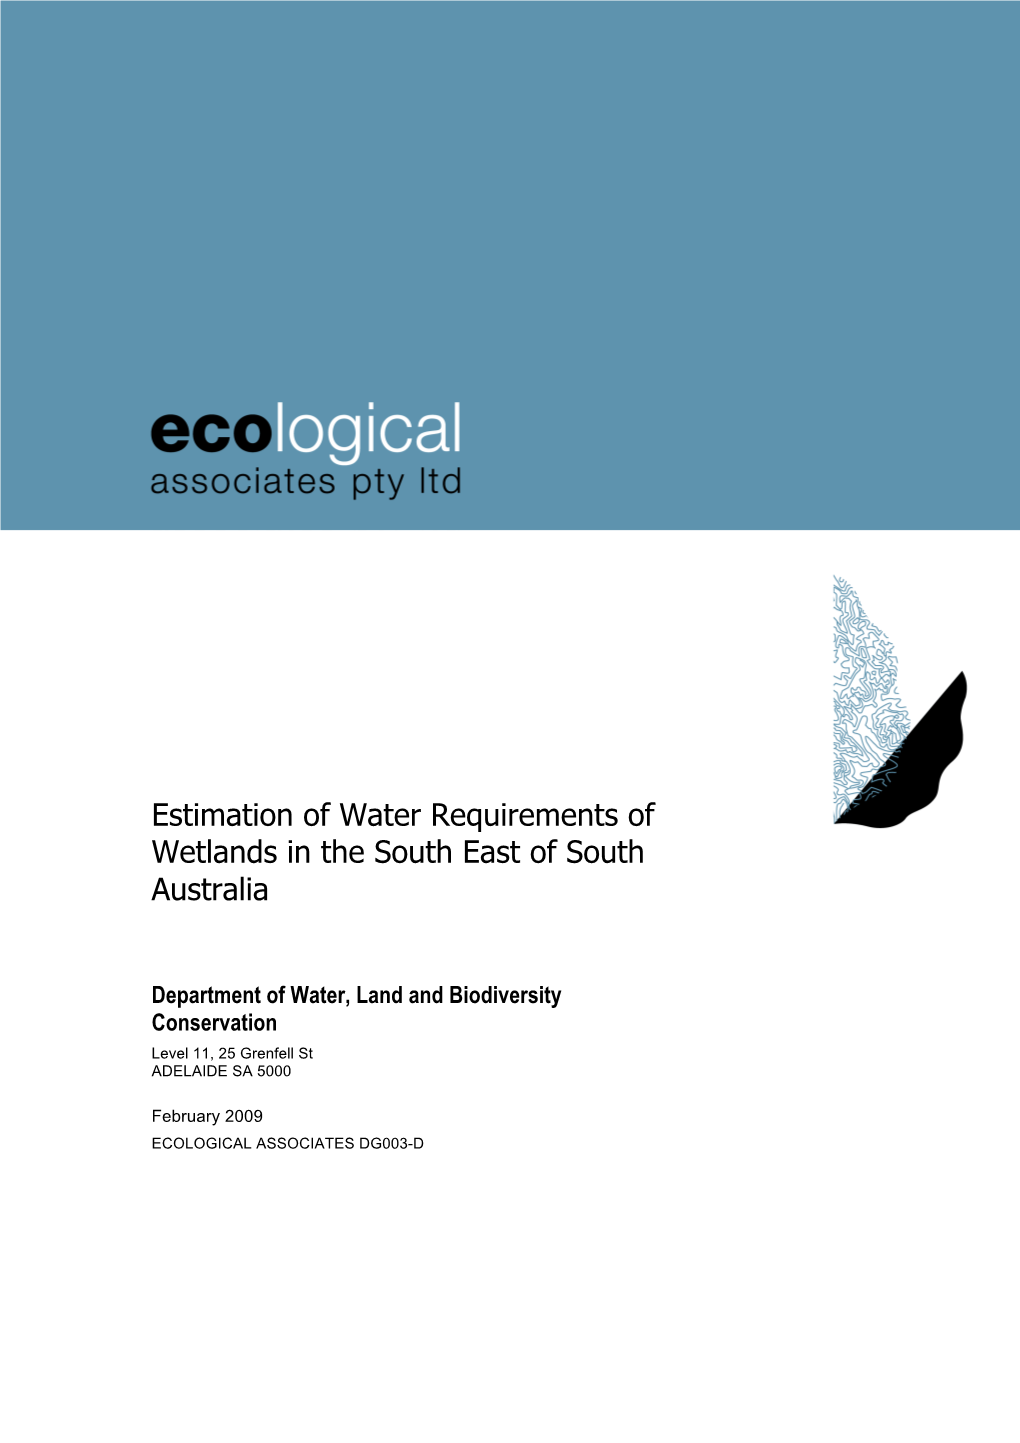 Estimation of Water Requirements of Wetlands in the South East of South Australia 2009